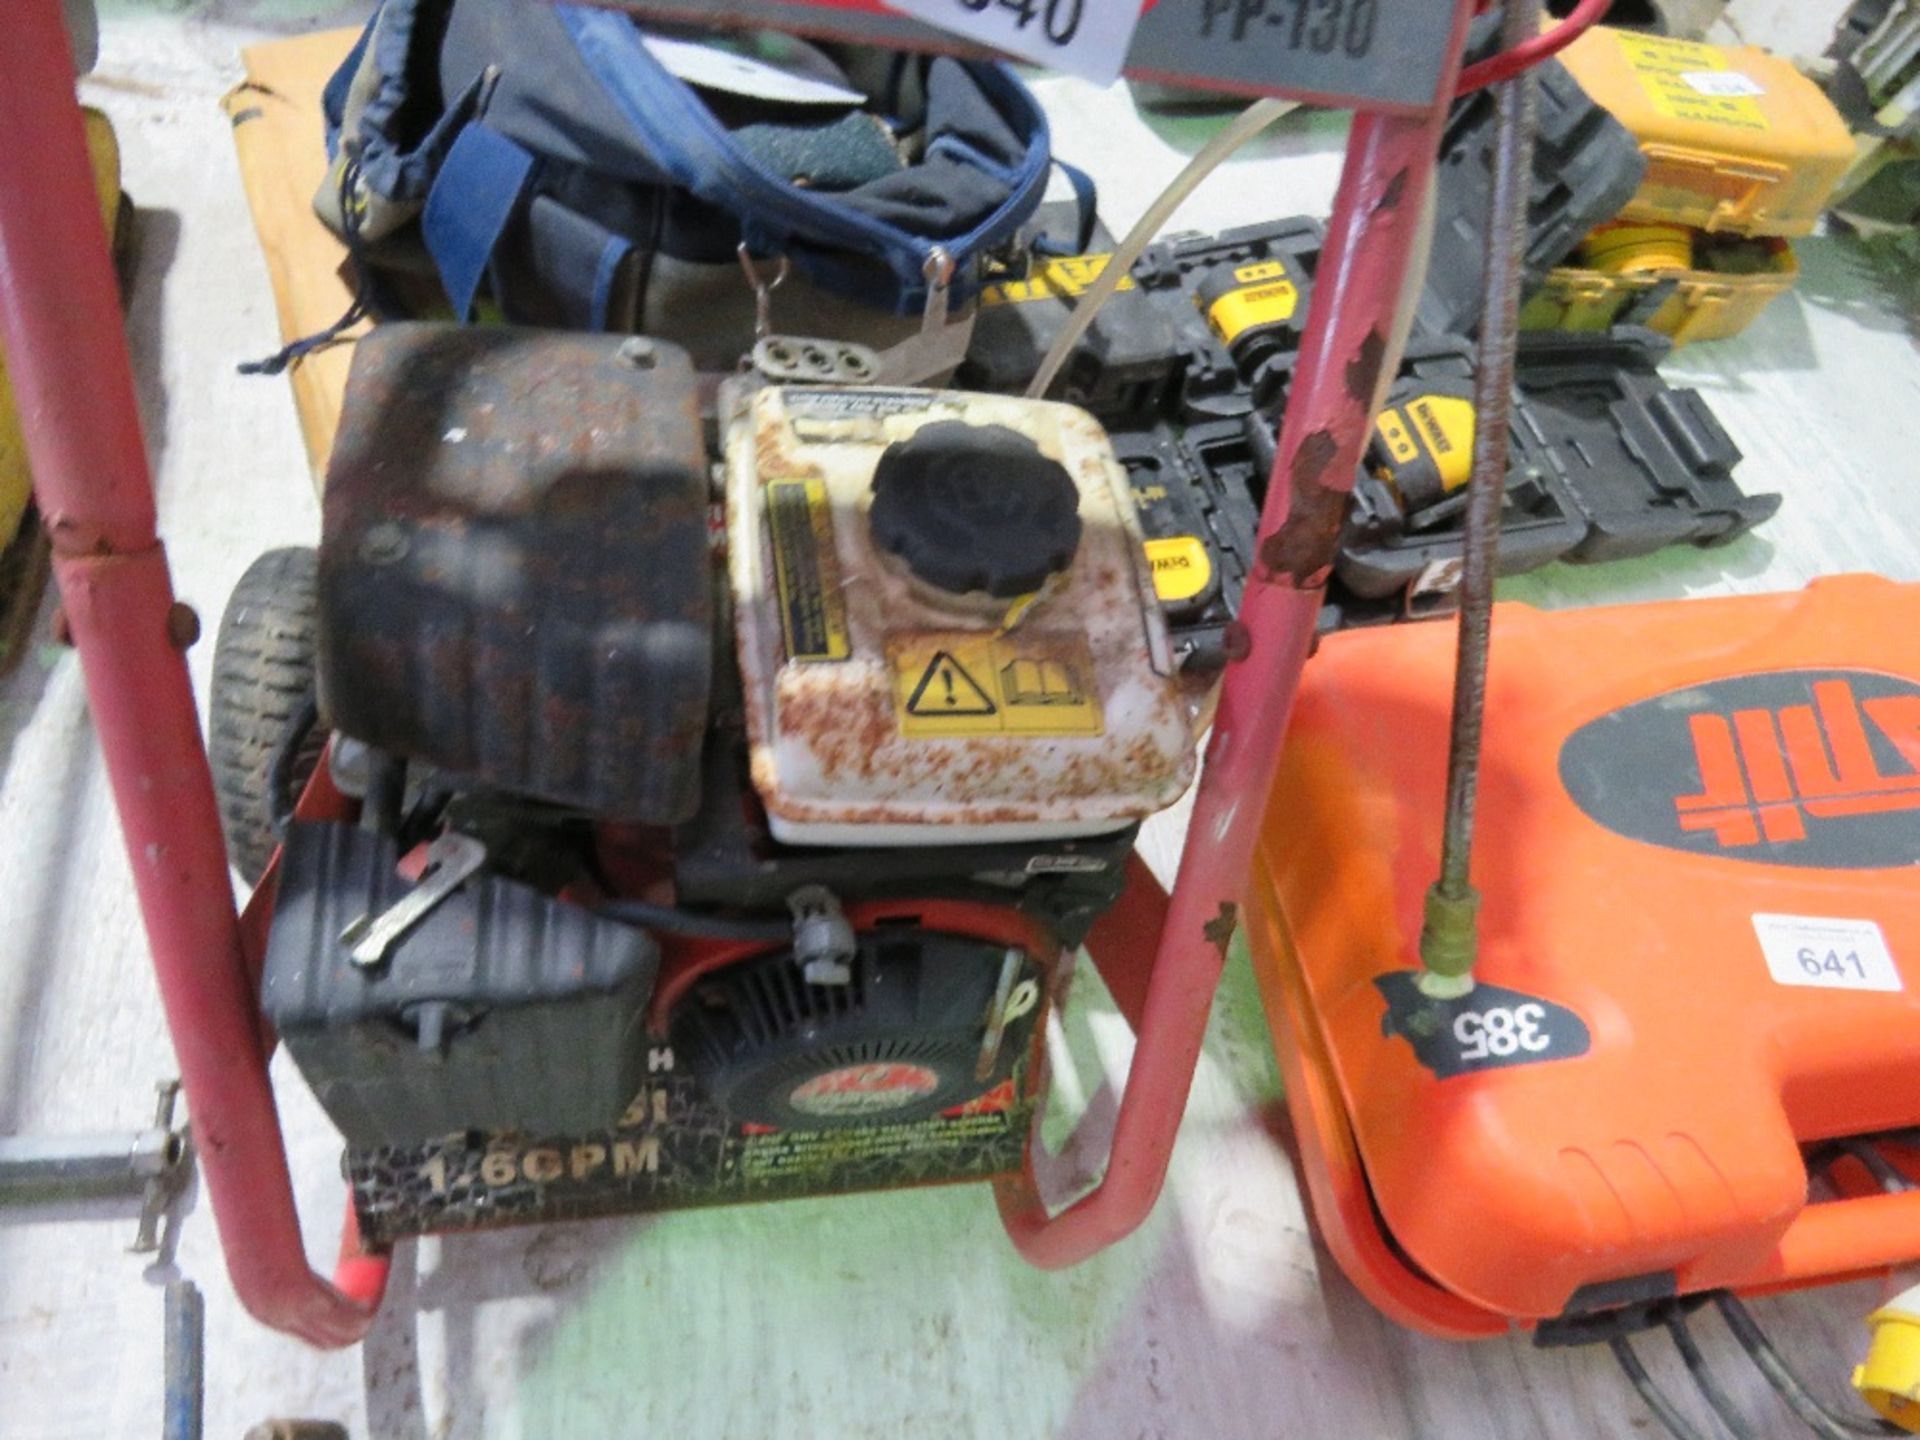 PETROL ENGINED POWER WASHER.....THIS LOT IS SOLD UNDER THE AUCTIONEERS MARGIN SCHEME, THEREFORE NO V - Image 3 of 4